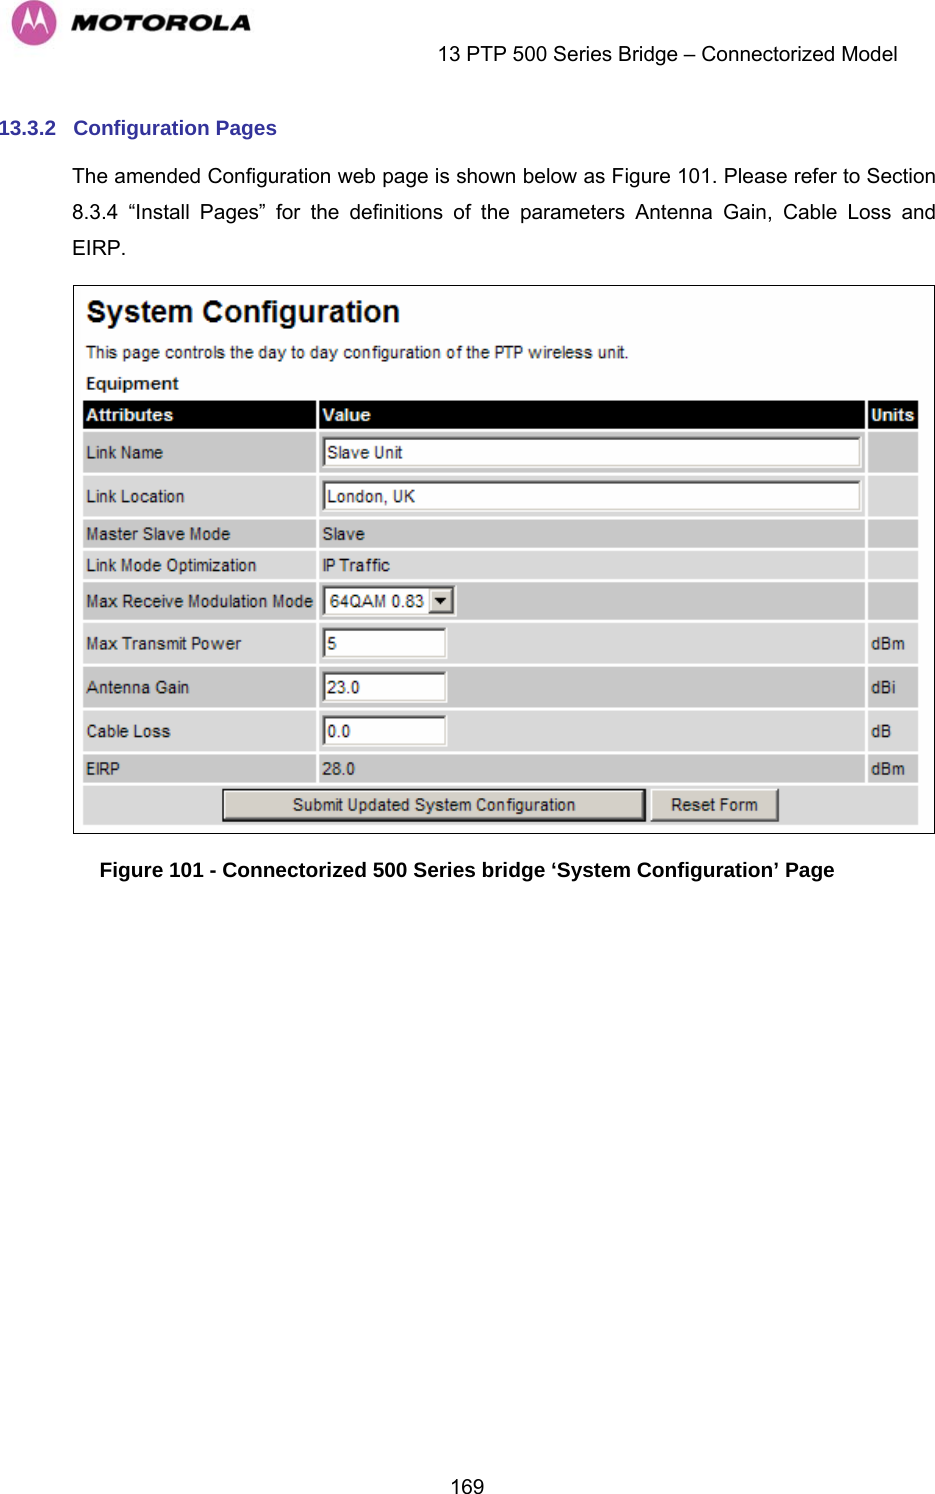    13 PTP 500 Series Bridge – Connectorized Model  16913.3.2  Configuration Pages The amended Configuration web page is shown below as Figure 101. Please refer to Section 8.3.4 “Install Pages” for the definitions of the parameters Antenna Gain, Cable Loss and EIRP.  Figure 101 - Connectorized 500 Series bridge ‘System Configuration’ Page 